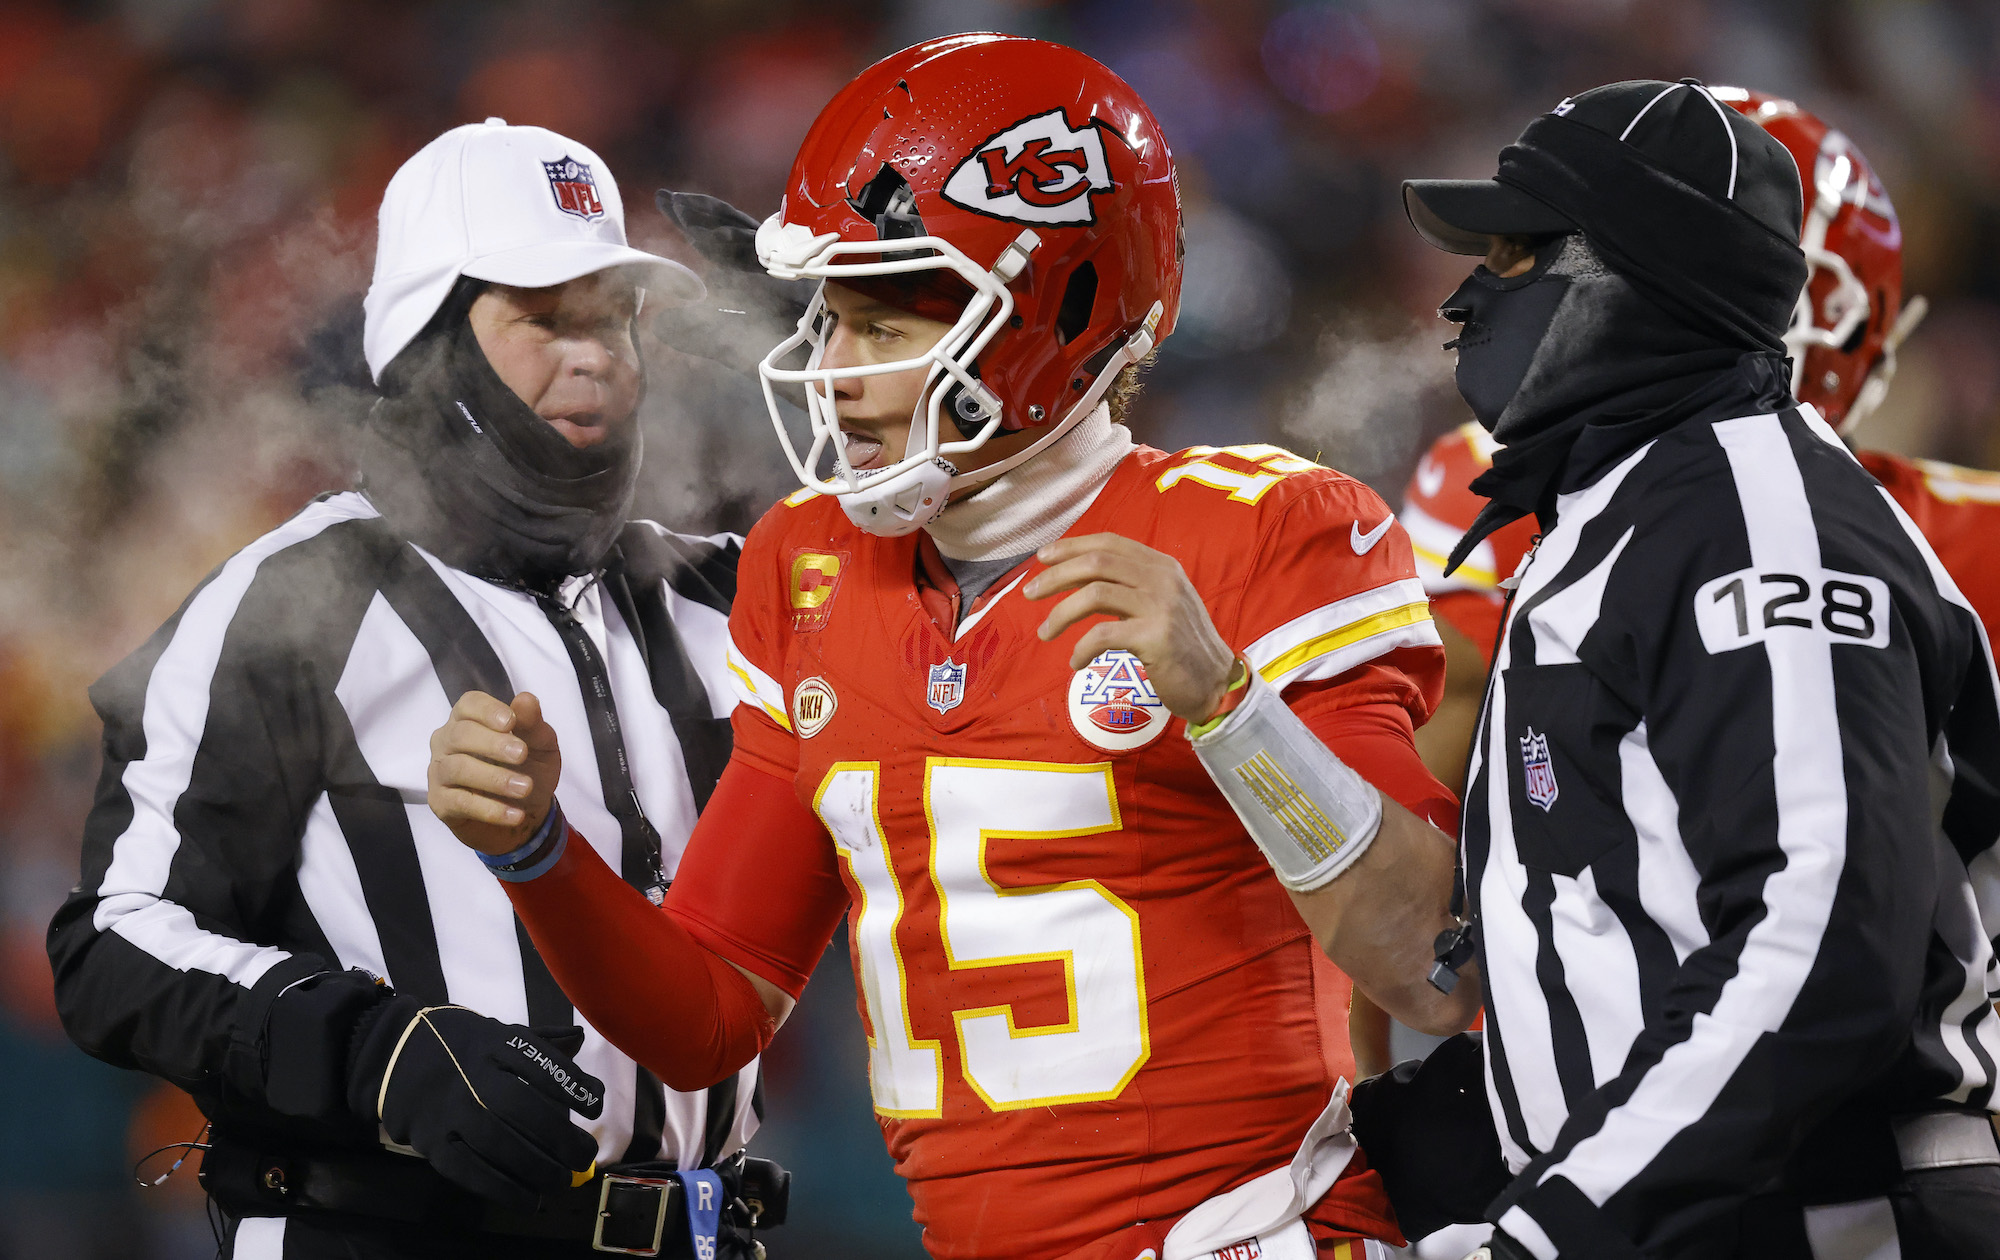 Patrick Mahomes of the Chiefs has a cracked helmet during Saturday's playoff game against the Dolphins.